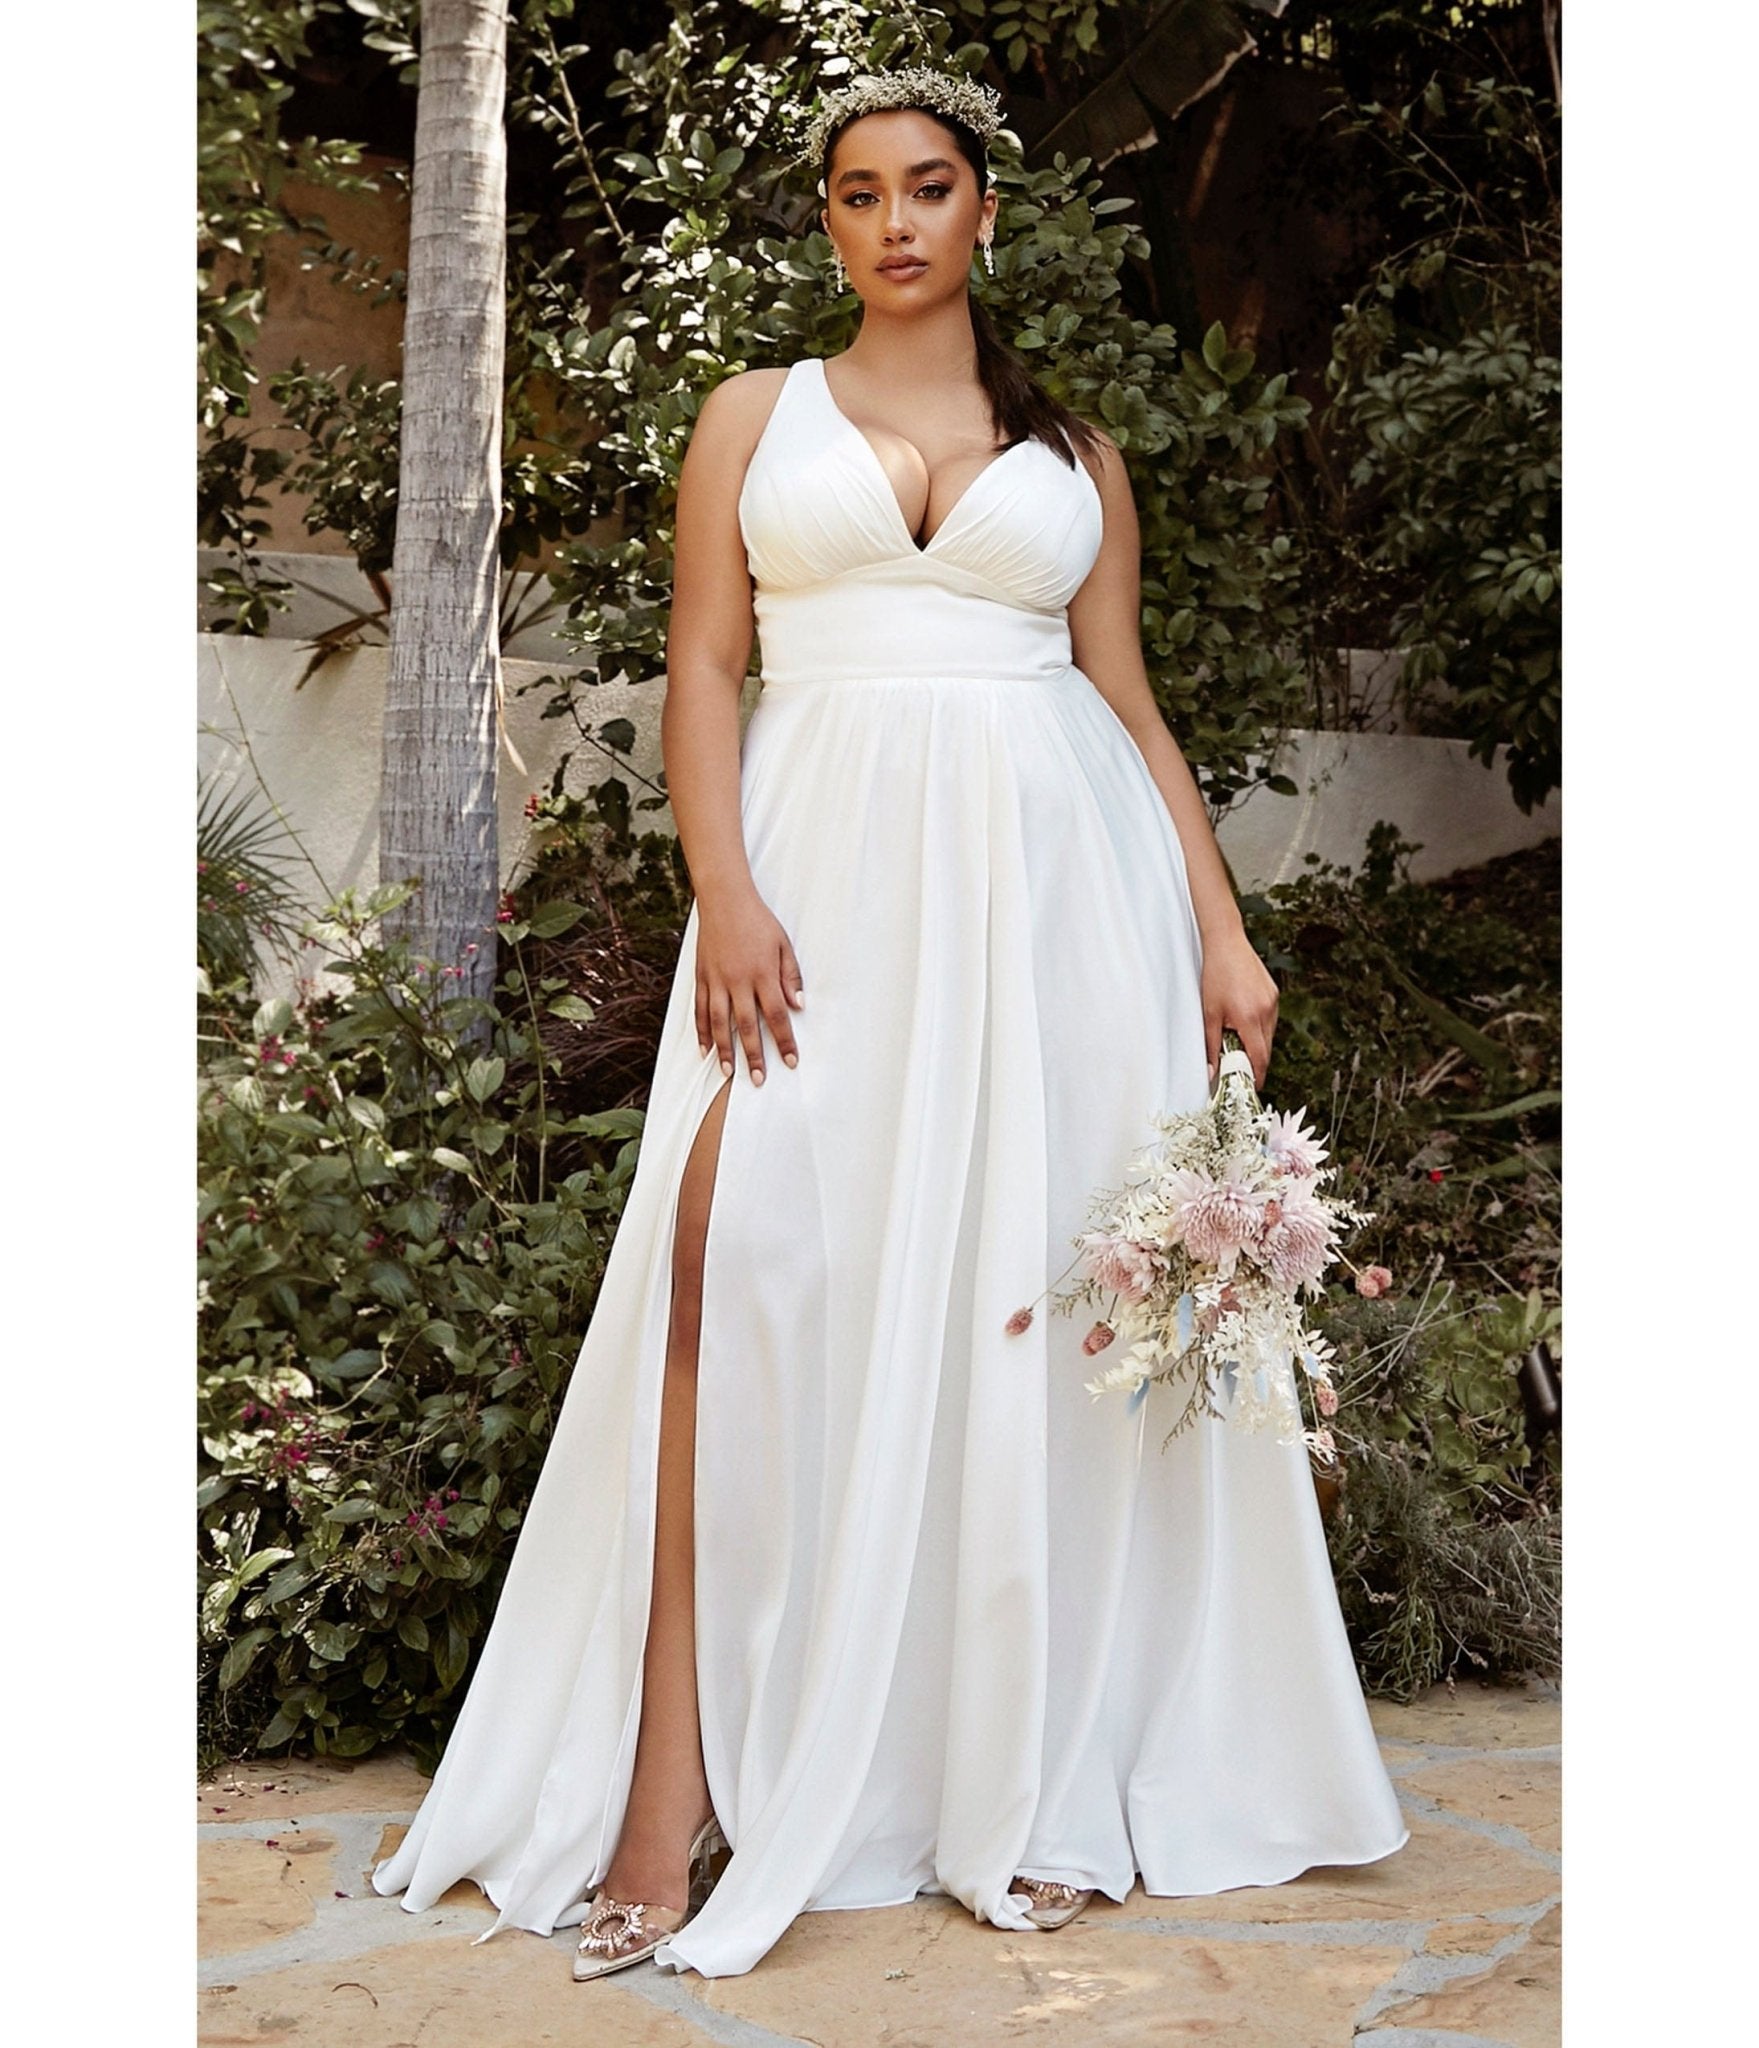 Buy Plus Size Satin Wedding Dress, a Line Satin Wedding Dress, Plus Size  Bridal Dress, Size Plus Short or Long Wedding Dress Online in India 